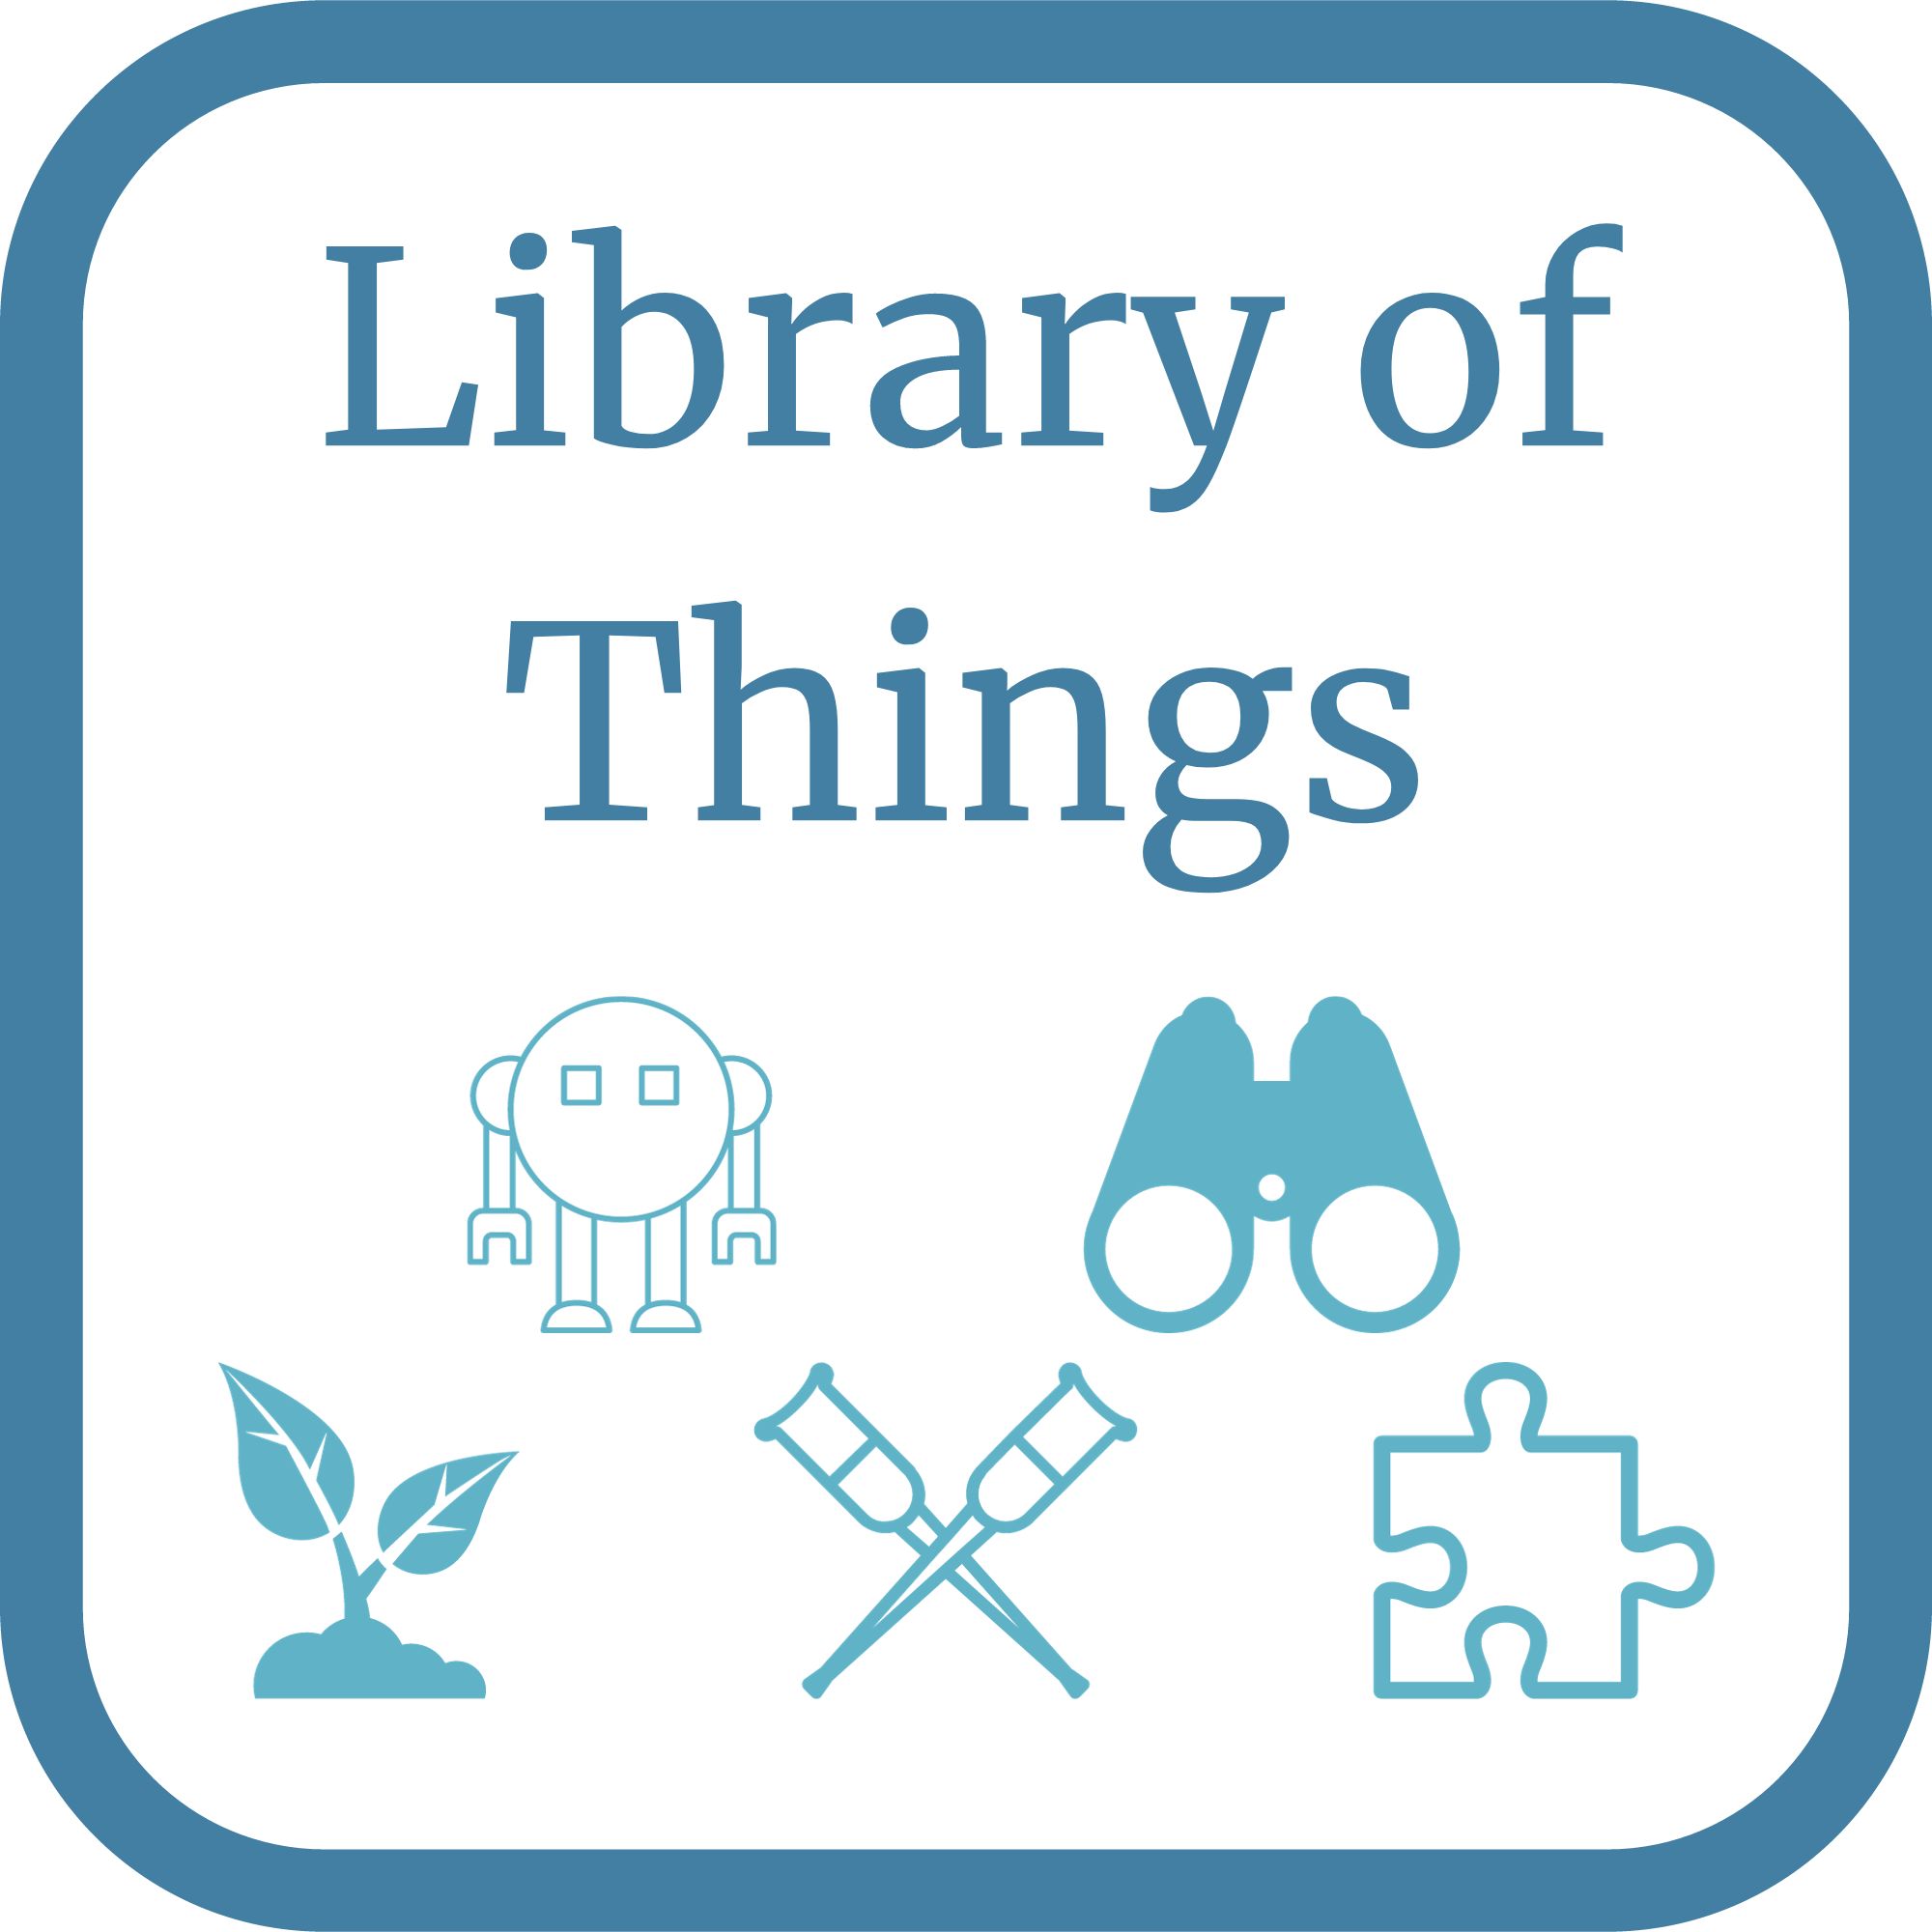 click to go to page about the library of things